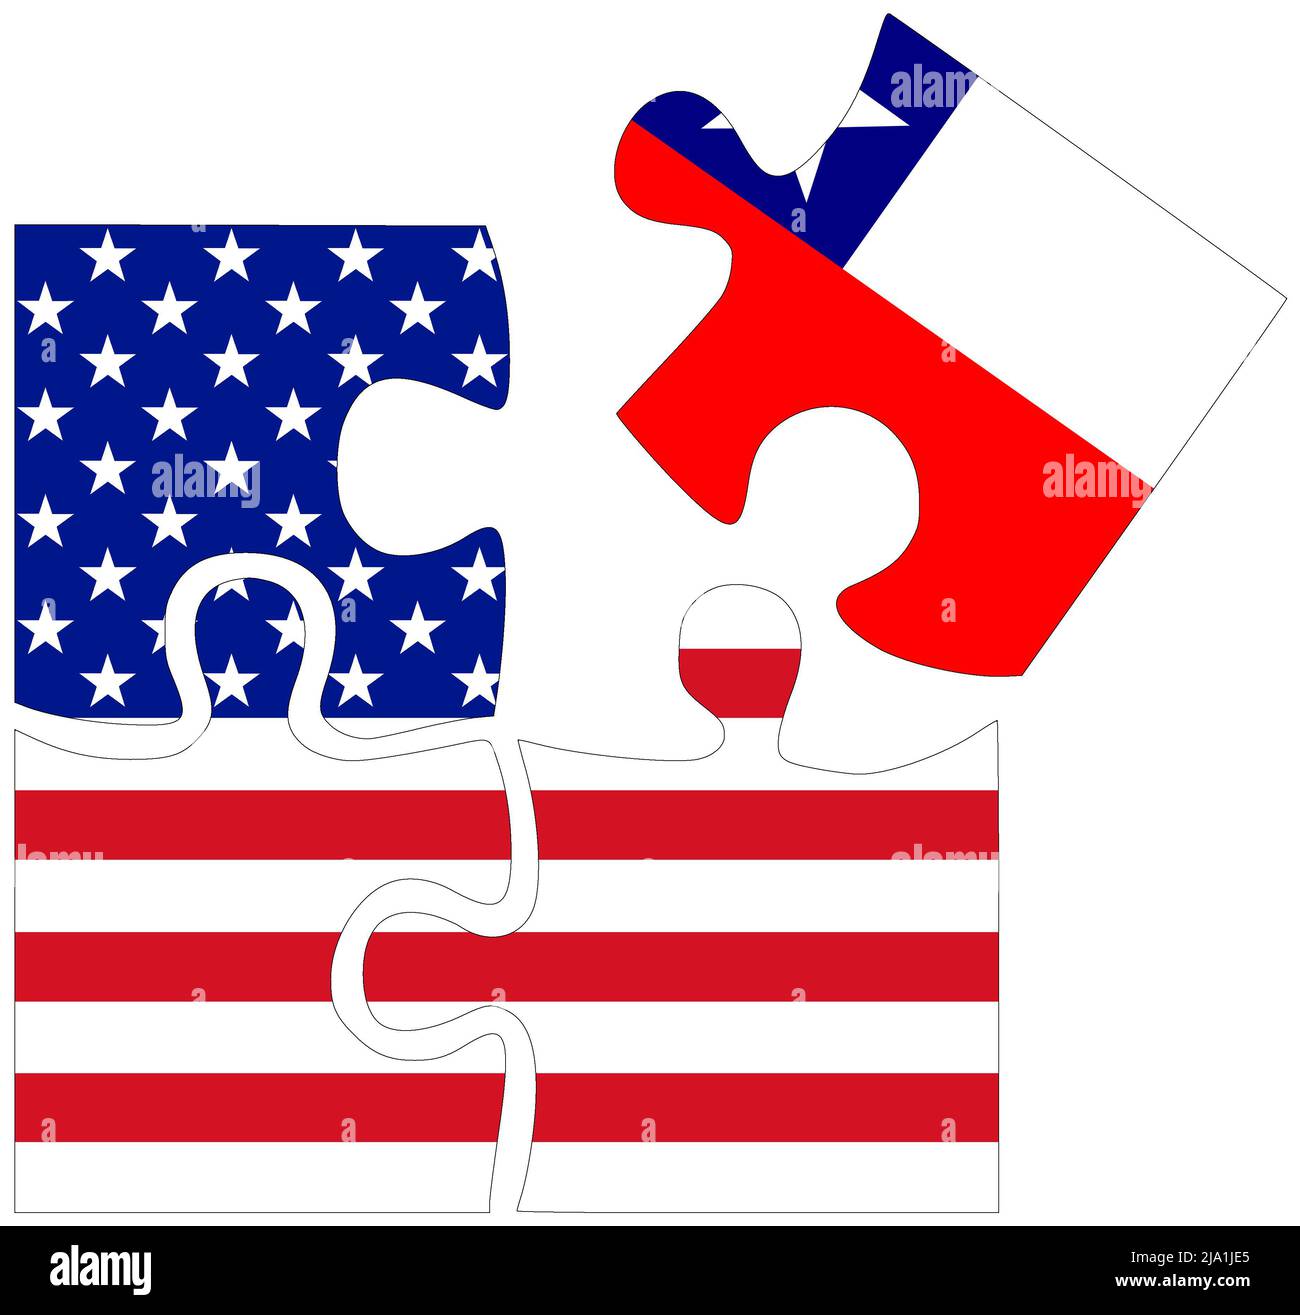 USA - Chile : puzzle shapes with flags, symbol of agreement or friendship Stock Photo